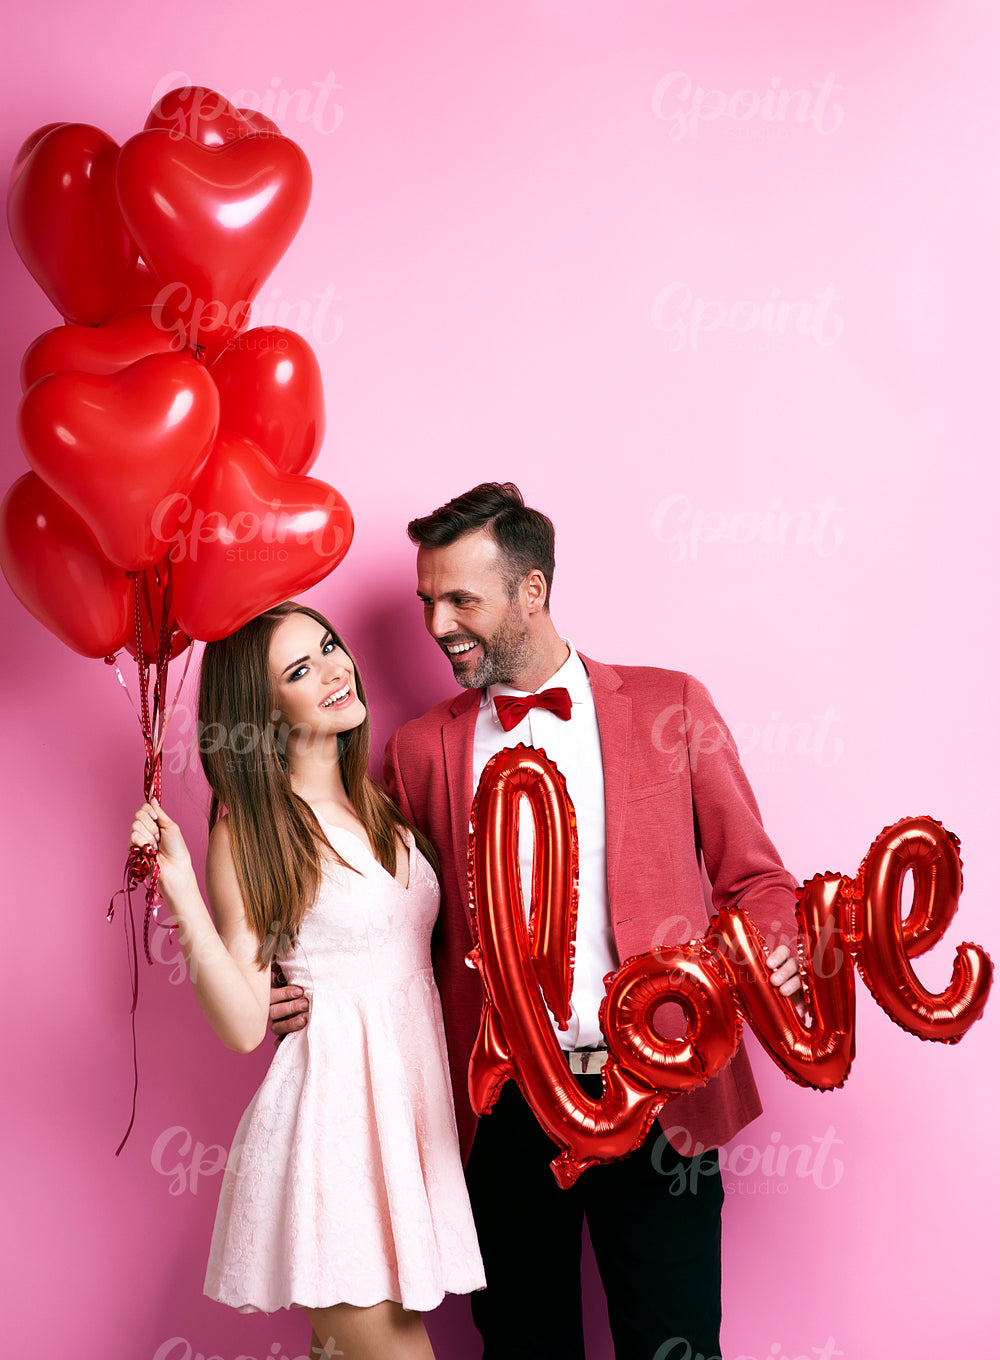 Affectionate couple with balloons embracing